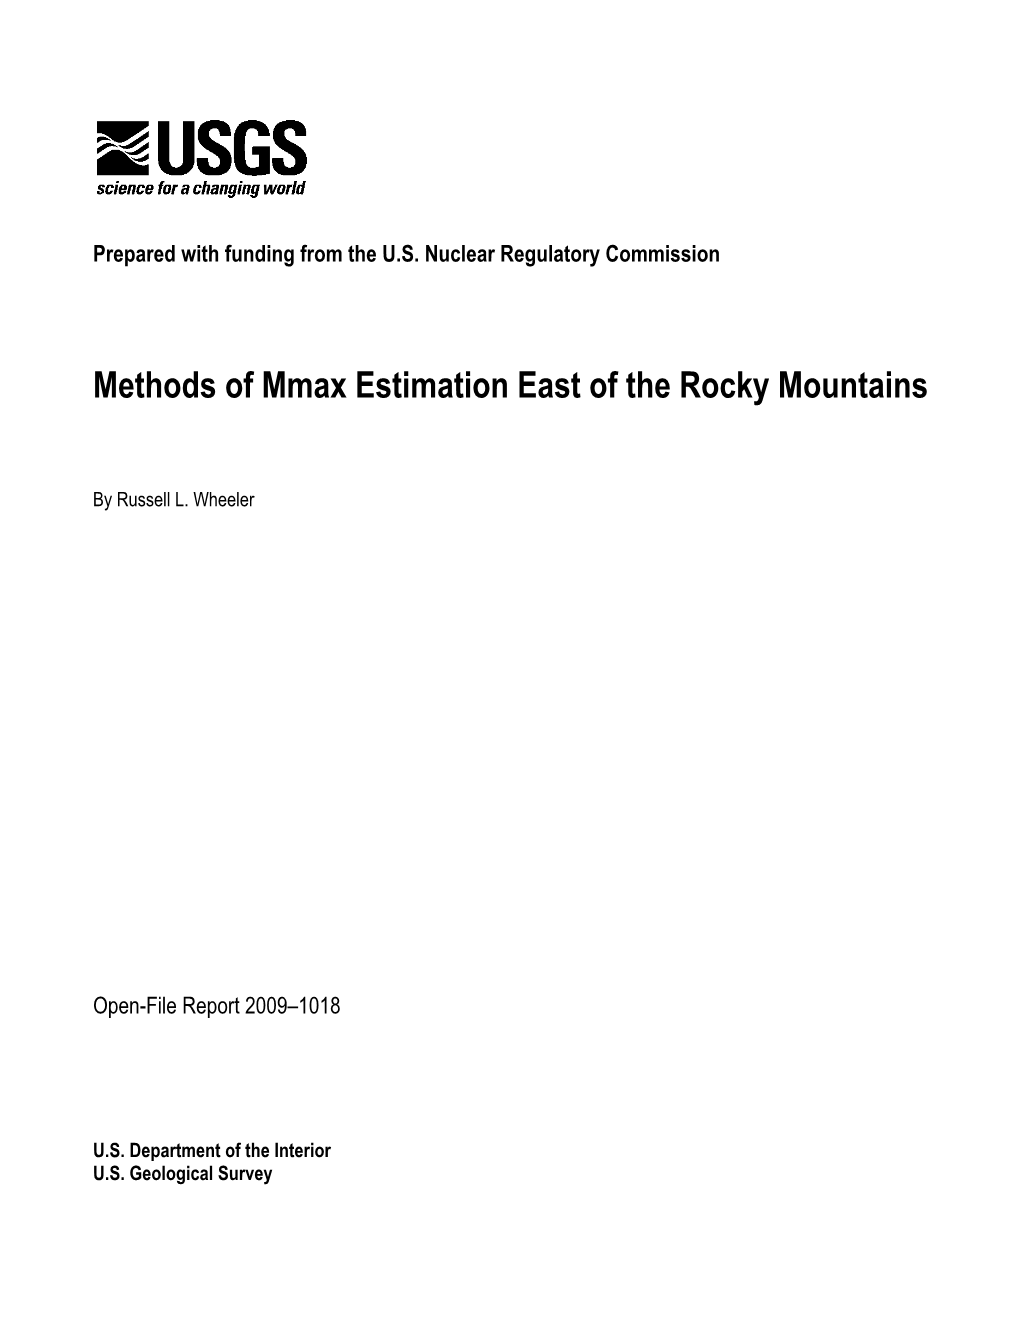 Methods of Mmax Estimation East of the Rocky Mountains